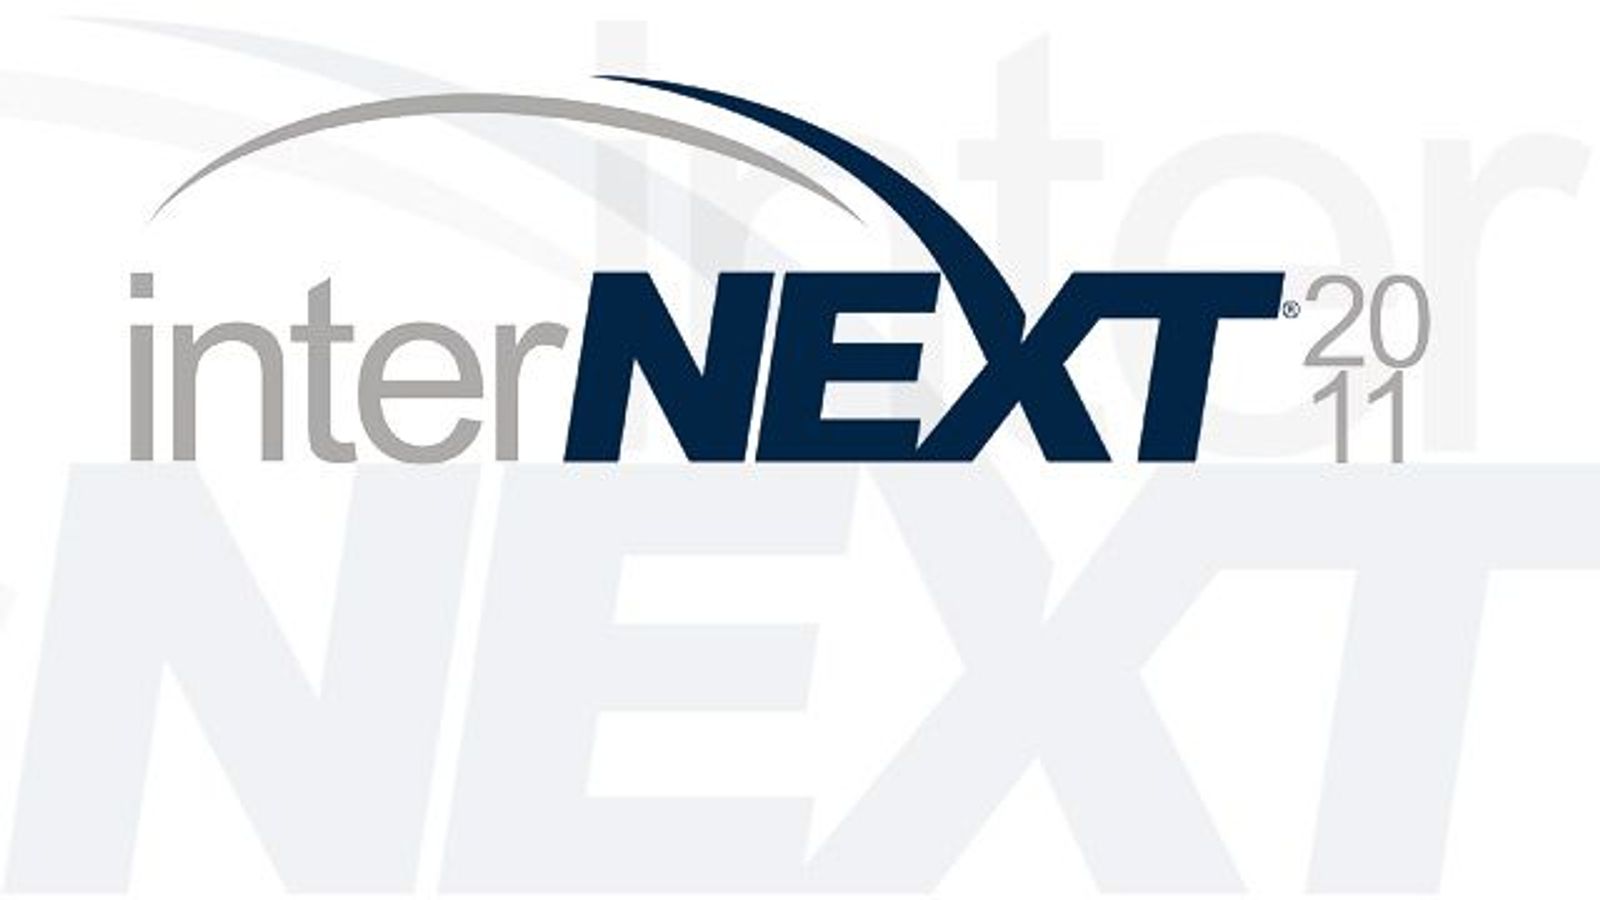 Internext Expo Website Goes Live, More Details Announced